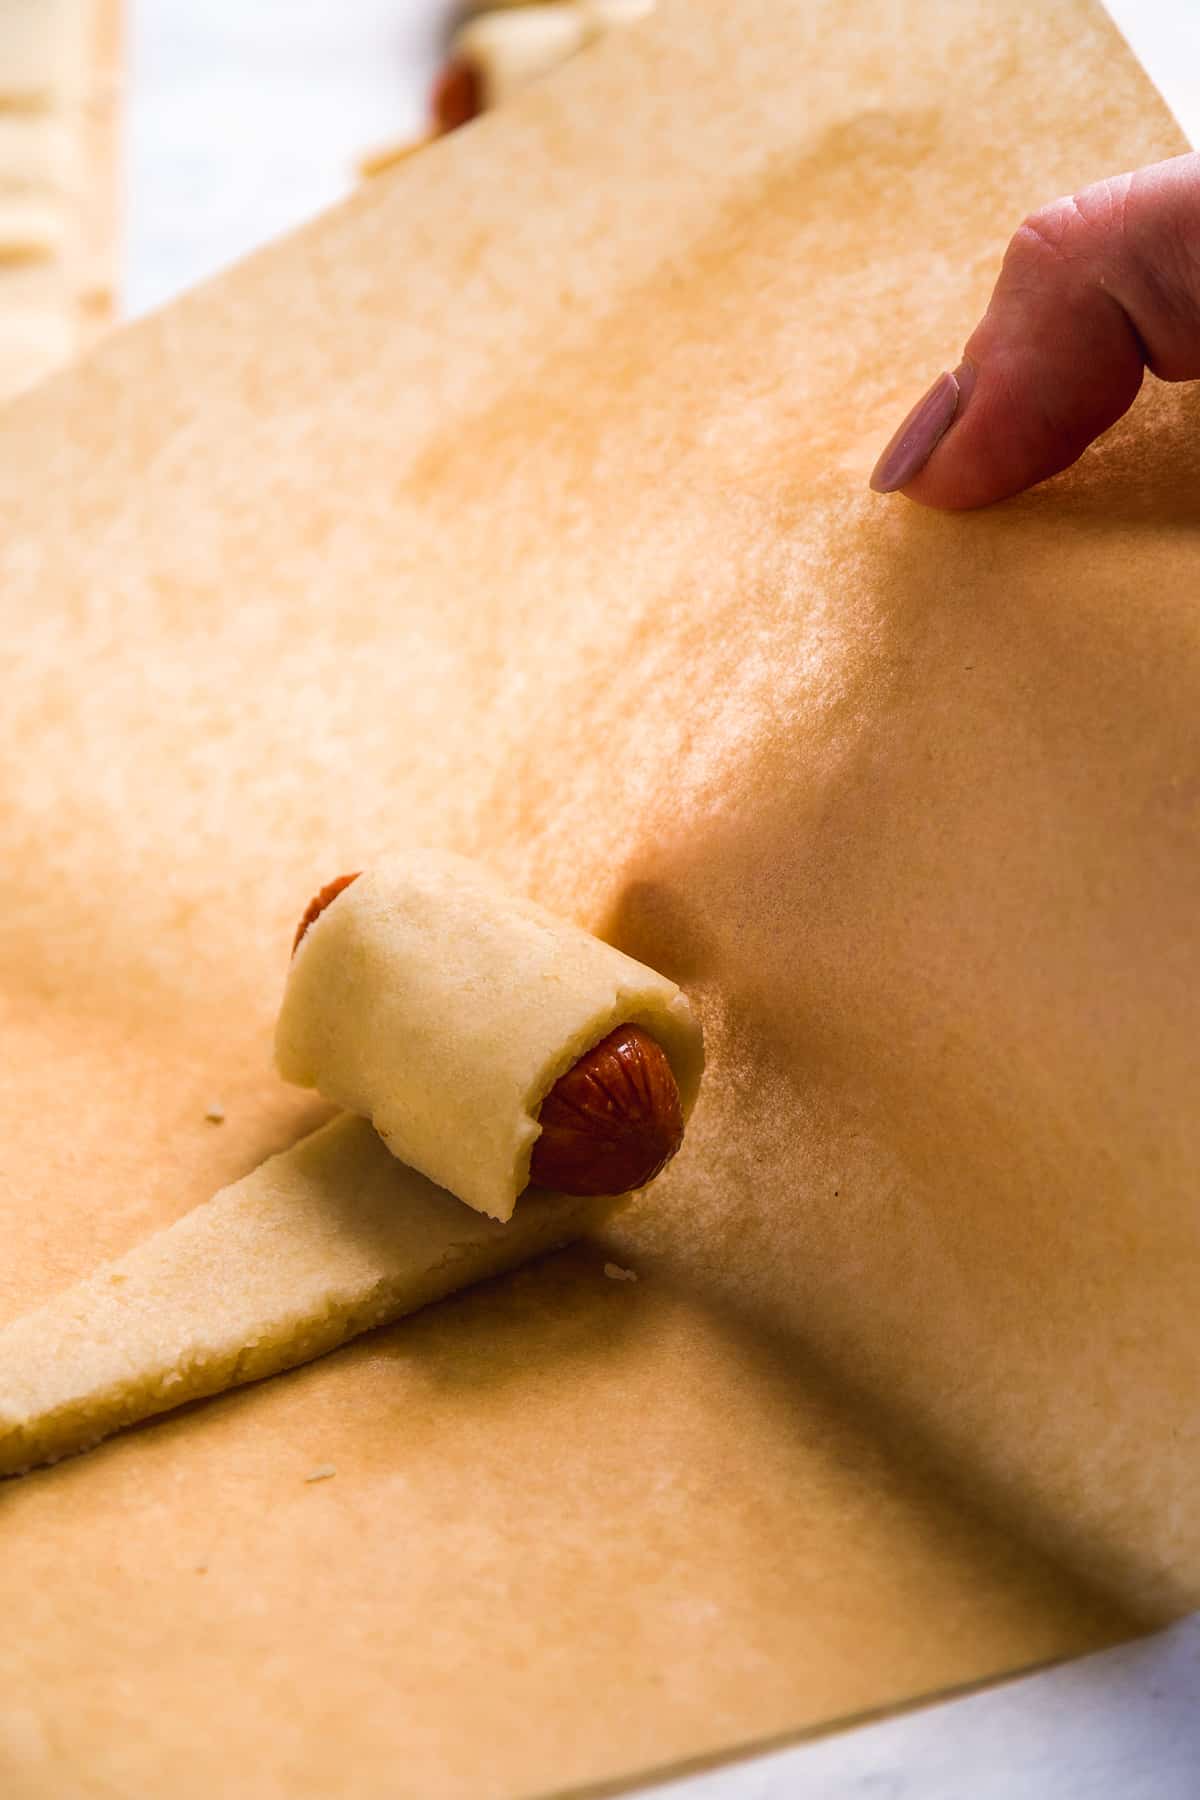 A mini sausage being rolled up in gluten free dough.